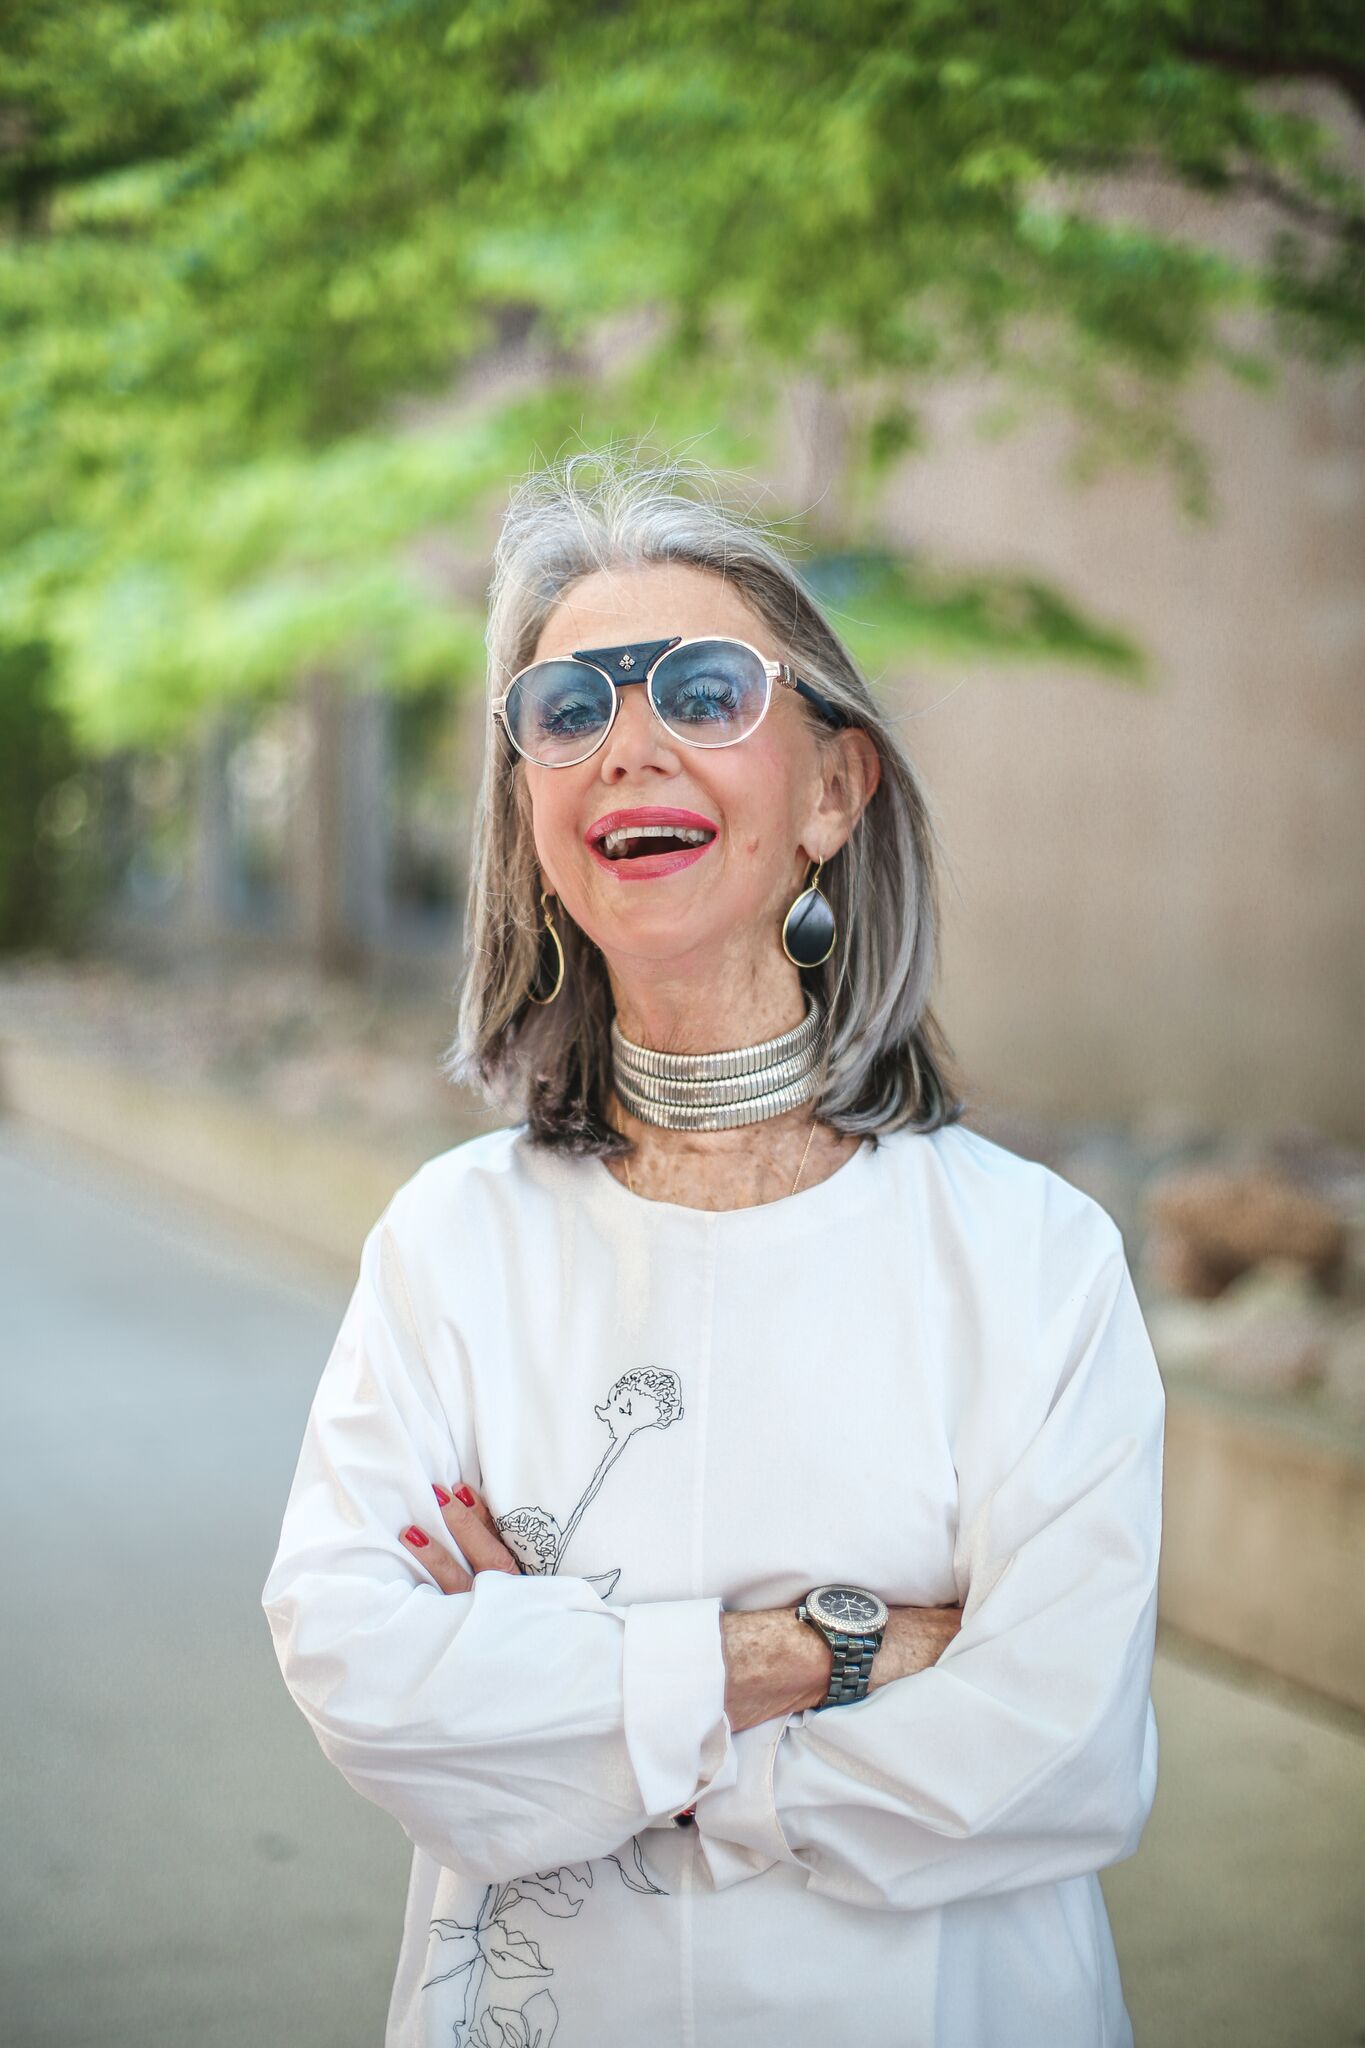 How to Remain Visible & Bloom After 50